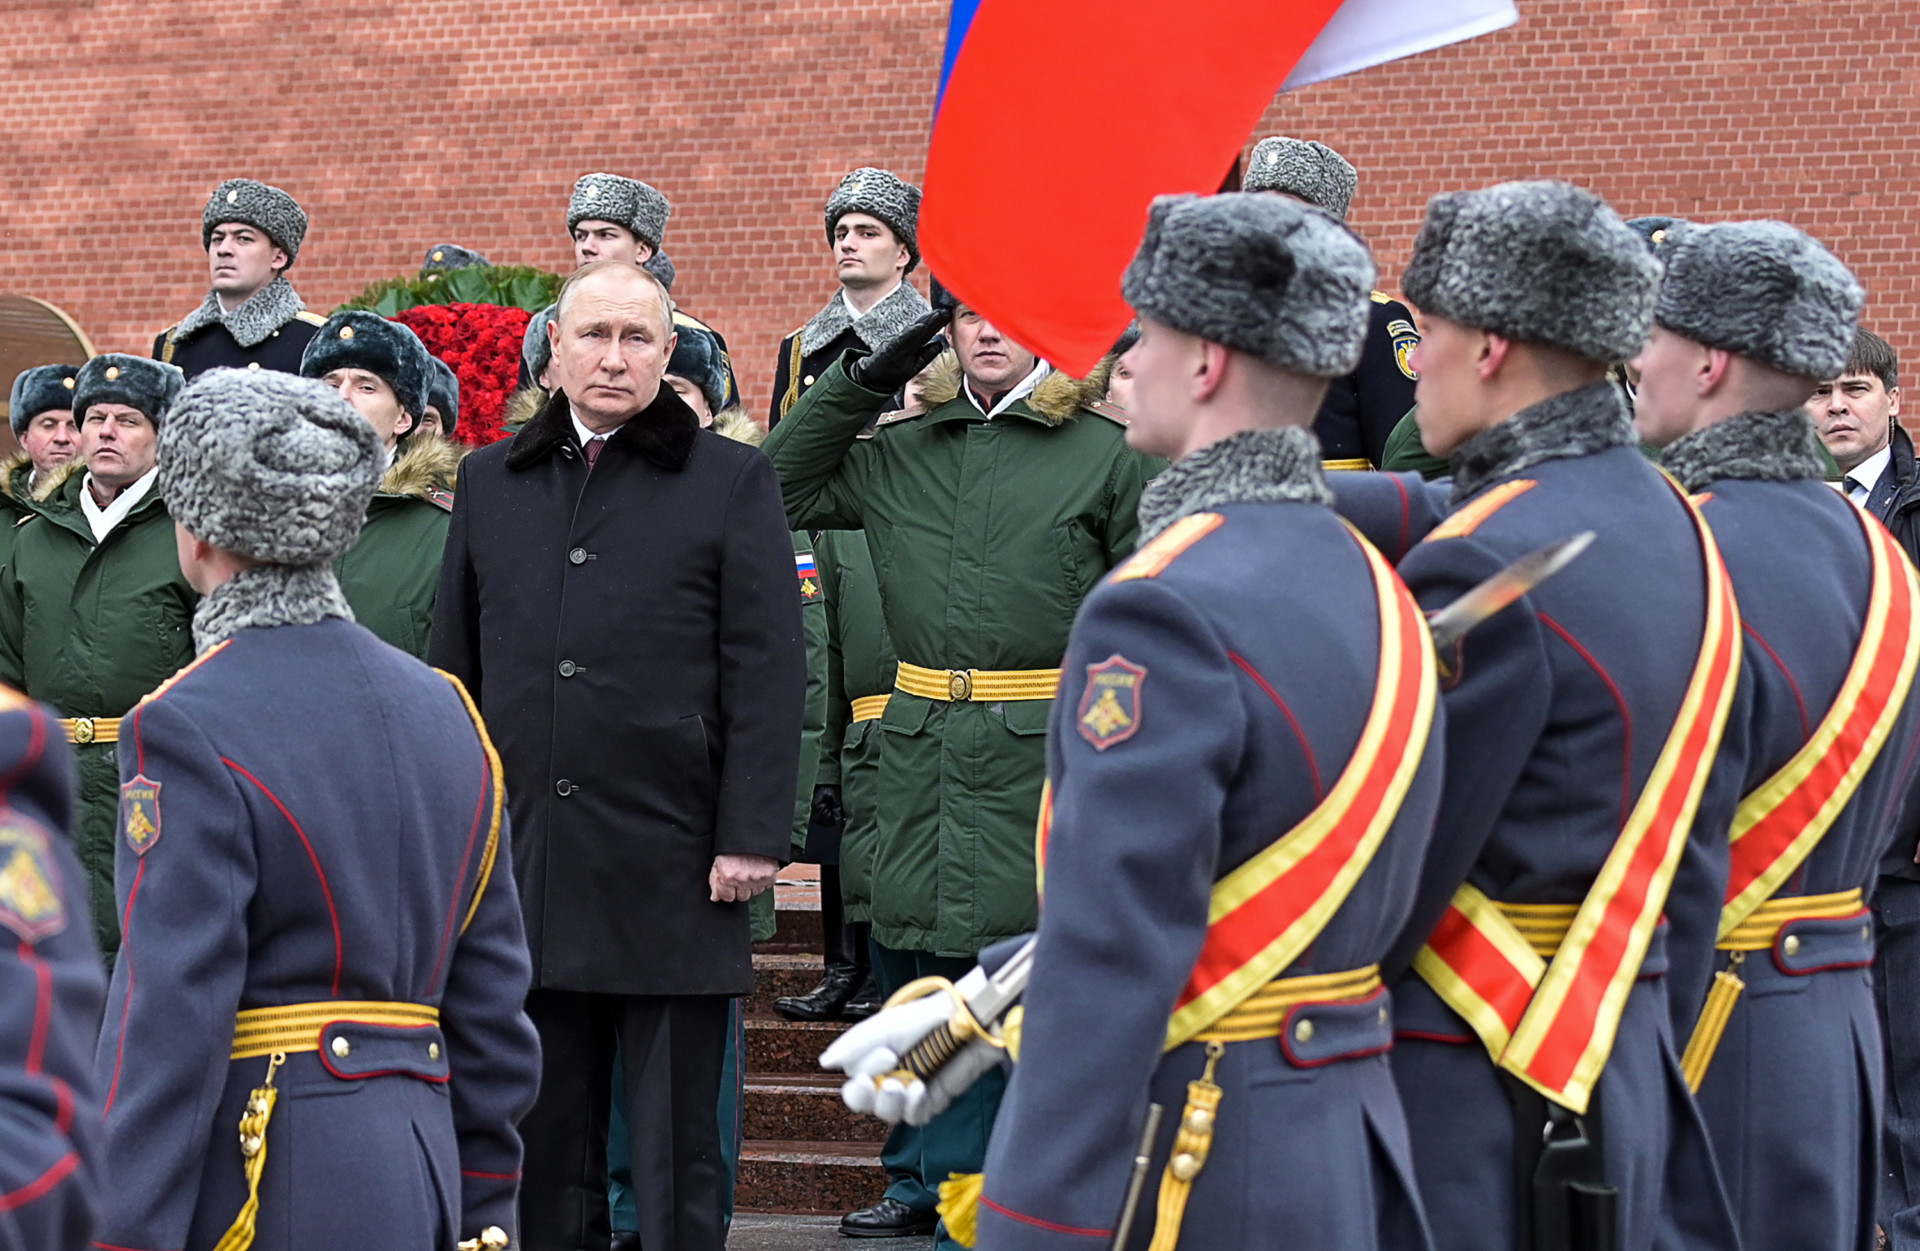 Wreath laying ceremony at Tomb of Unknown Soldier in Moscow on Defender of the Fatherland Day|20220308-Russian-Military-Ops-Chart_Peak-troops-map|20220308-Russian-Military-Ops-Chart_Russia-in-Ukraine|20220309-Russia-Ukraine-Pushes-Map|20220309-Russia-Ukraine-Collapse-Map|20220309-Russia-Ukraine-Pushes-Map-1